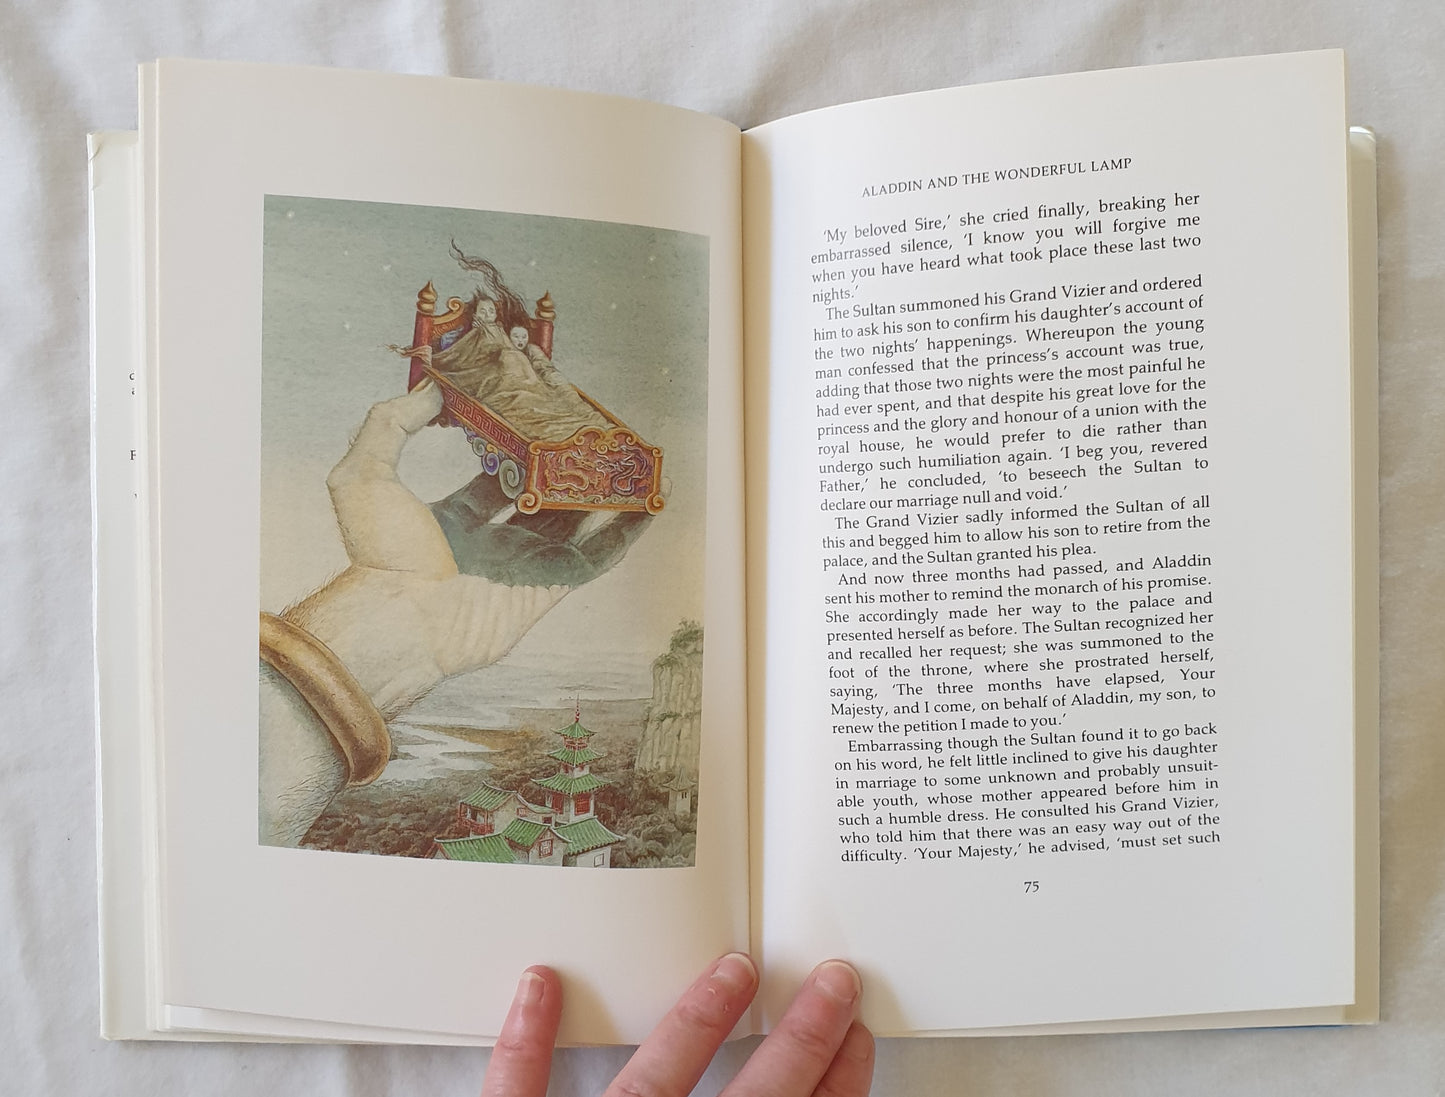 The Faber Book of Favourite Fairy Tales by Sara and Stephen Corrin